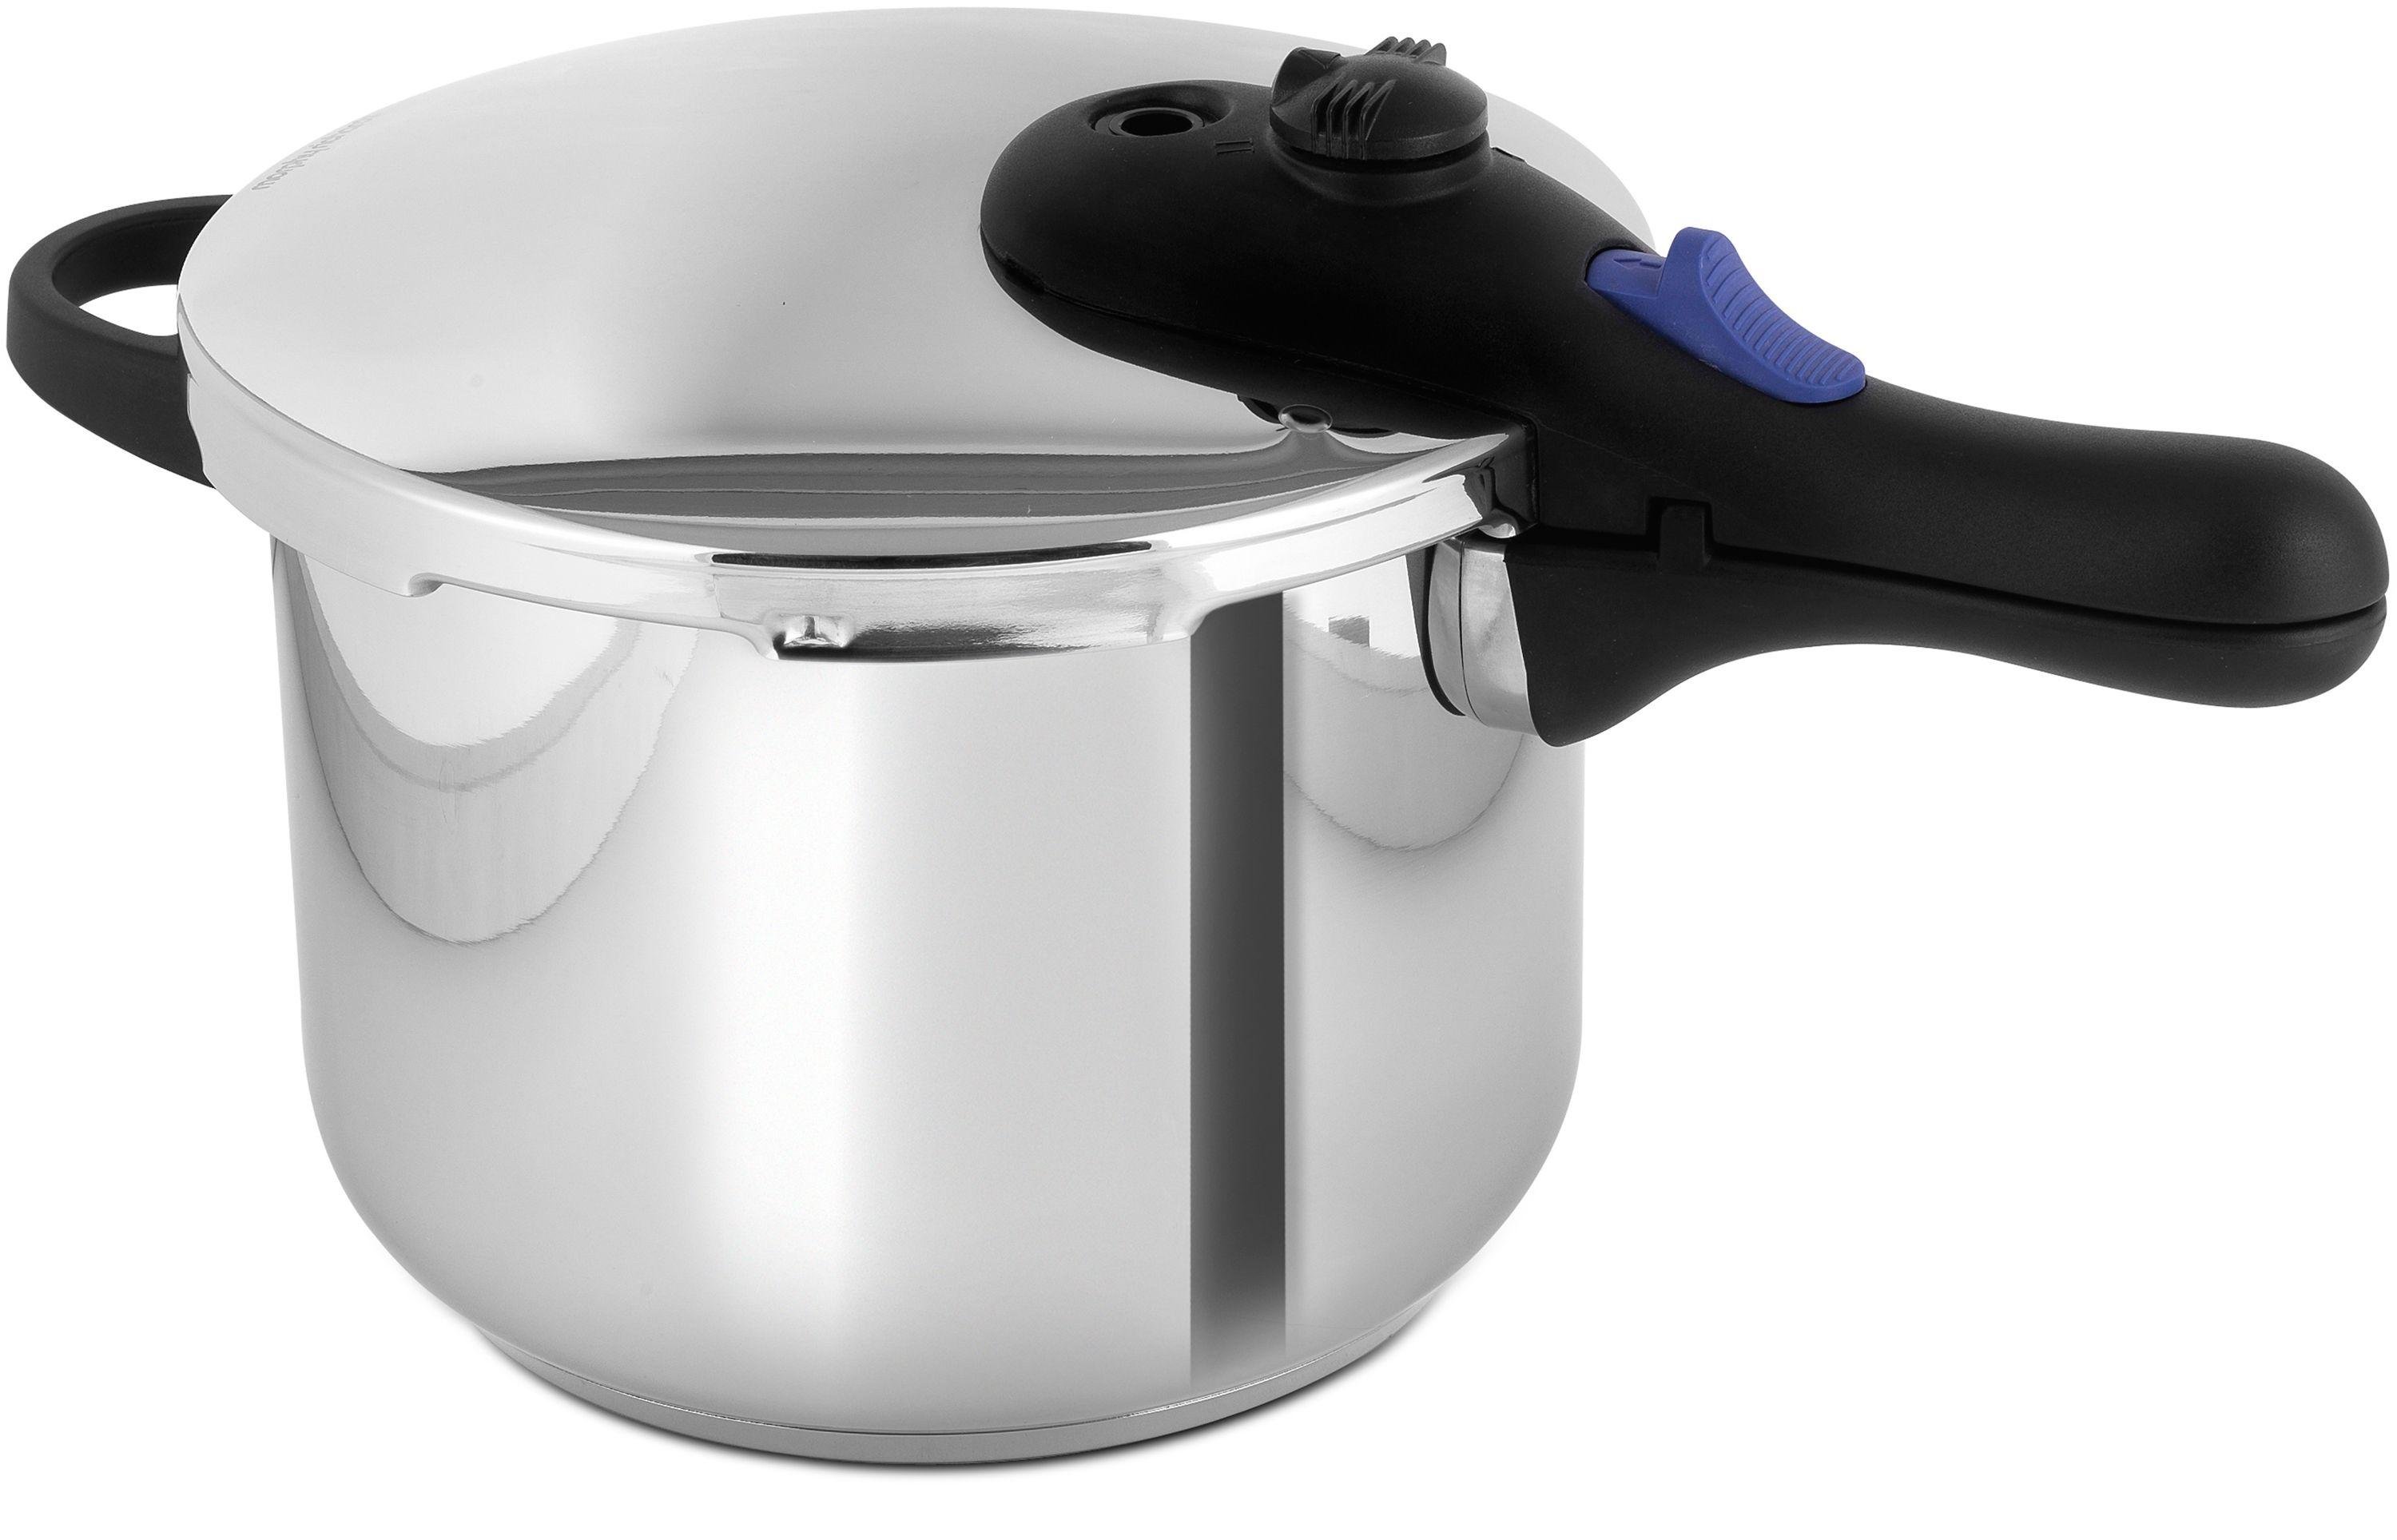 Morphy Richards Equip 2.7L Stainless Steel Pressure Cooker Reviews